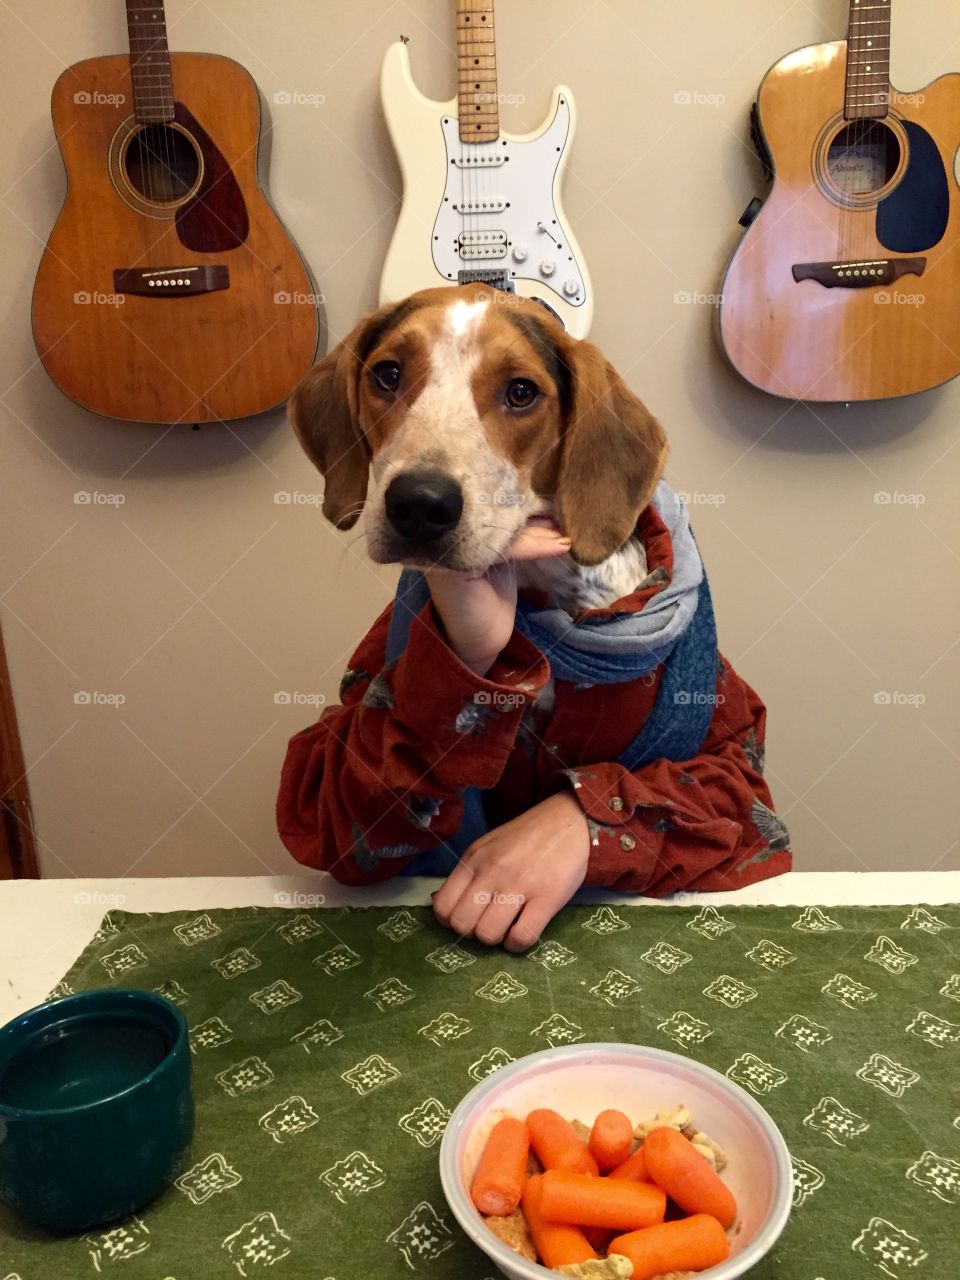 Bigsby the treeing walker coonhound contemplates his tough life as a spoiled dog 